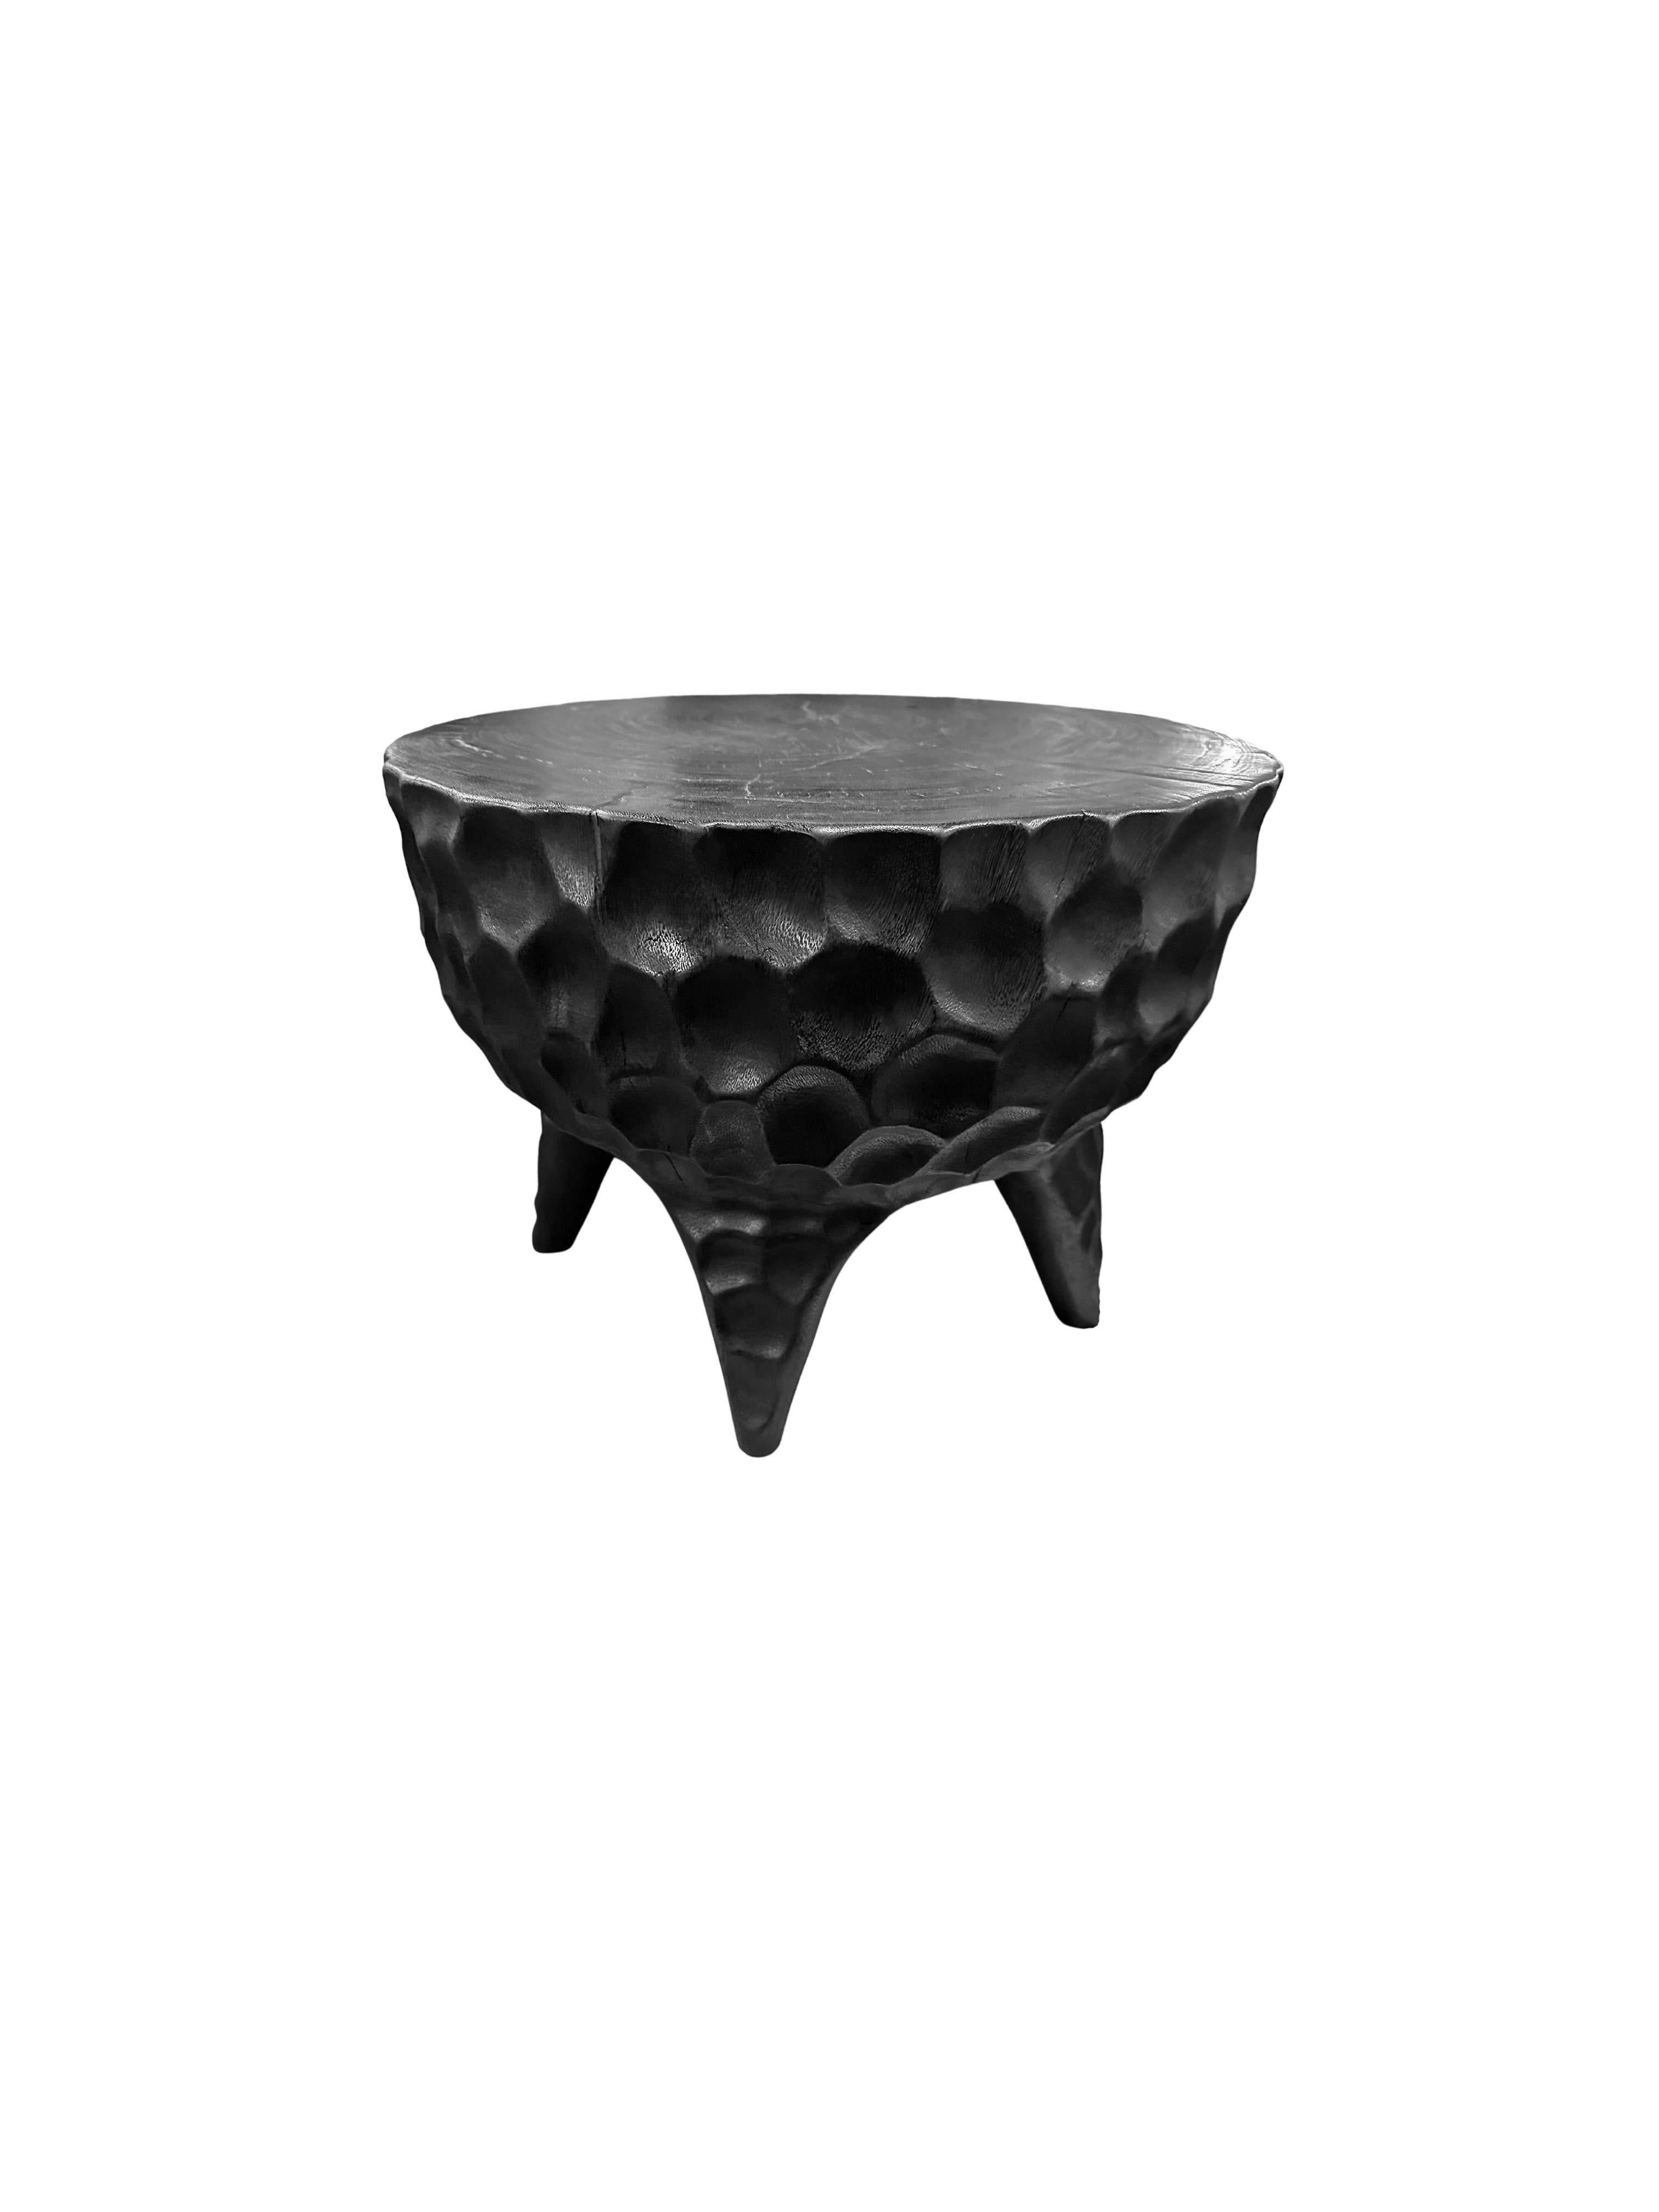 An elegantly rounded, sculptural side table crafted from a single block of mango wood. Unique to this table is the hand-hewn detailing on all sides. The table top was sanded down providing a smooth finish and contrast in texture. To achieve its